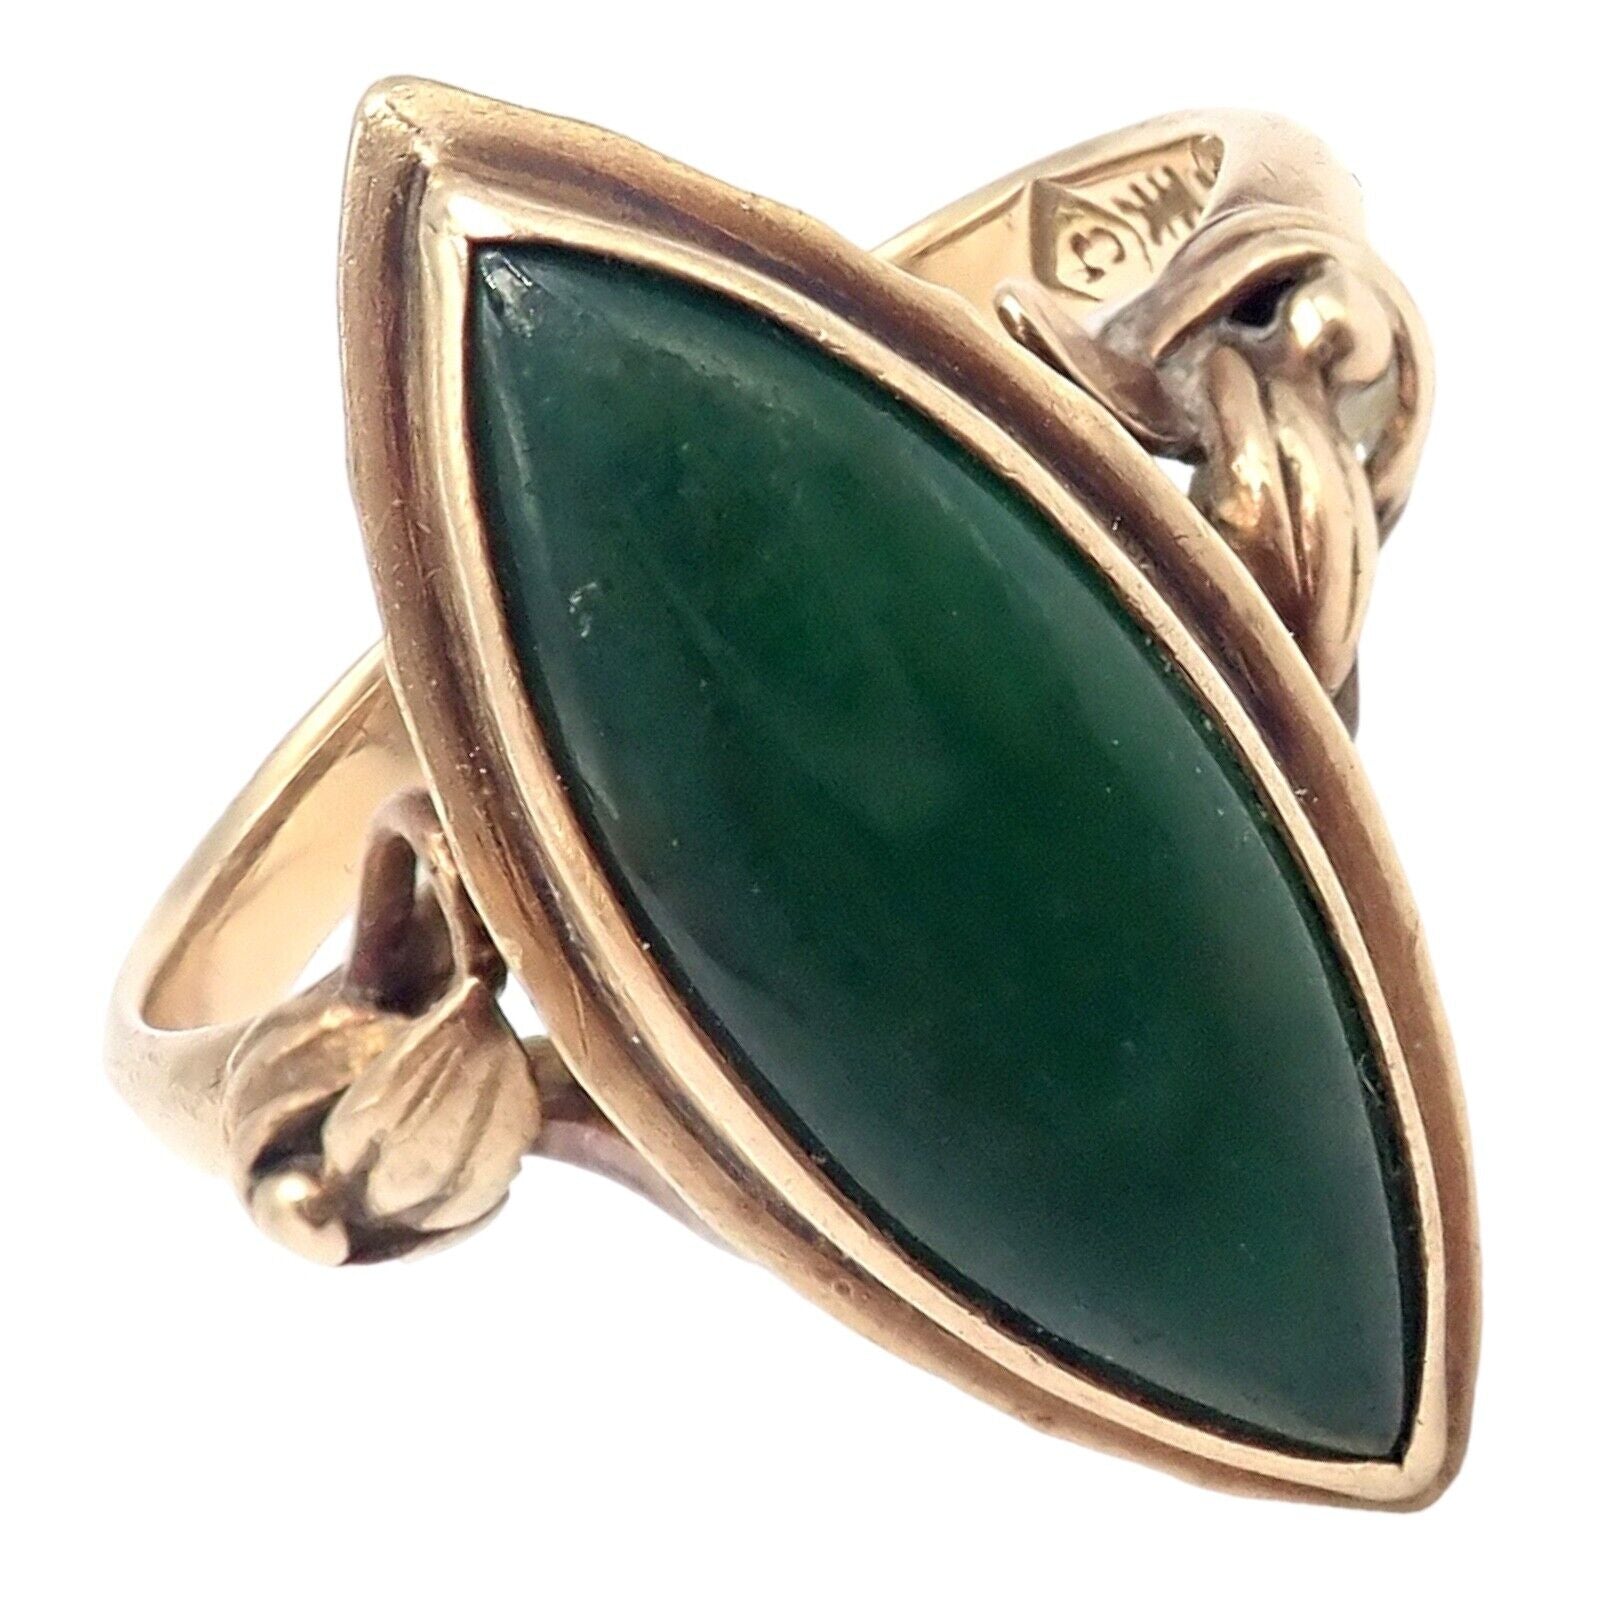 CJ Caribe Jewelry & Watches:Vintage & Antique Jewelry:Rings Vintage Estate 14k Yellow Gold Green Stone Art Deco CJ Caribe Ring sz 6.5